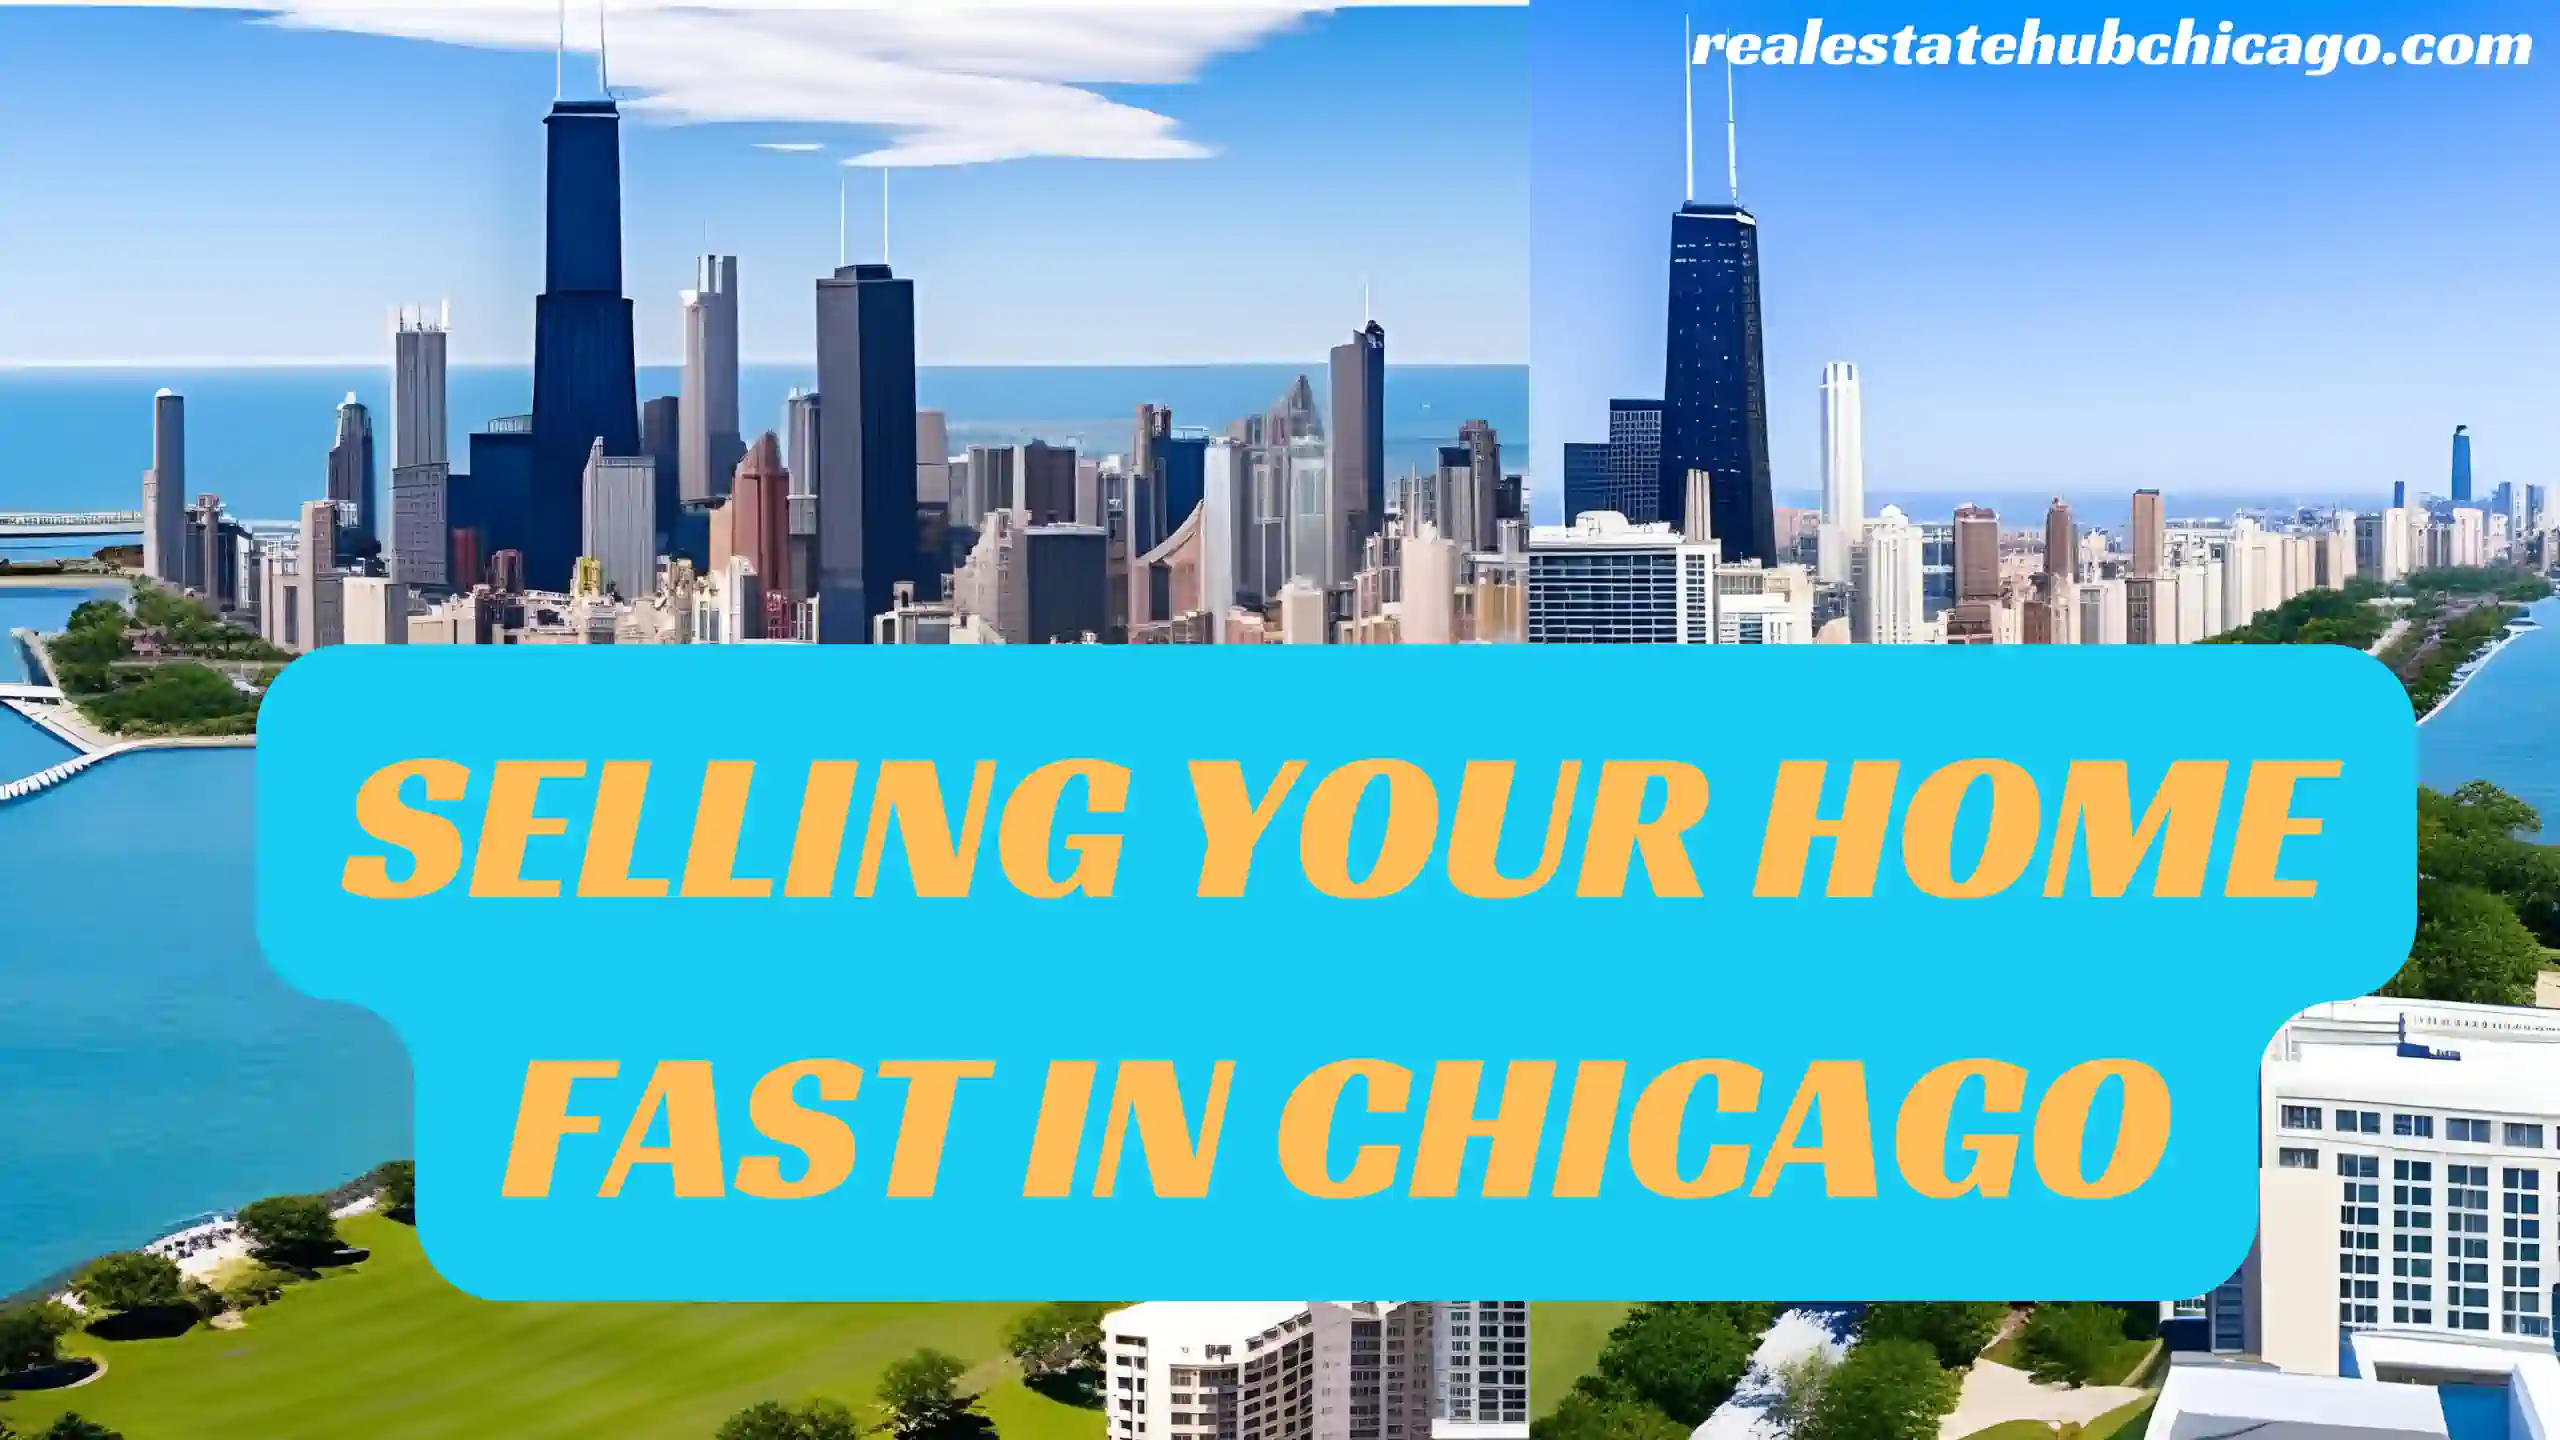 Selling your home fast in Chicago